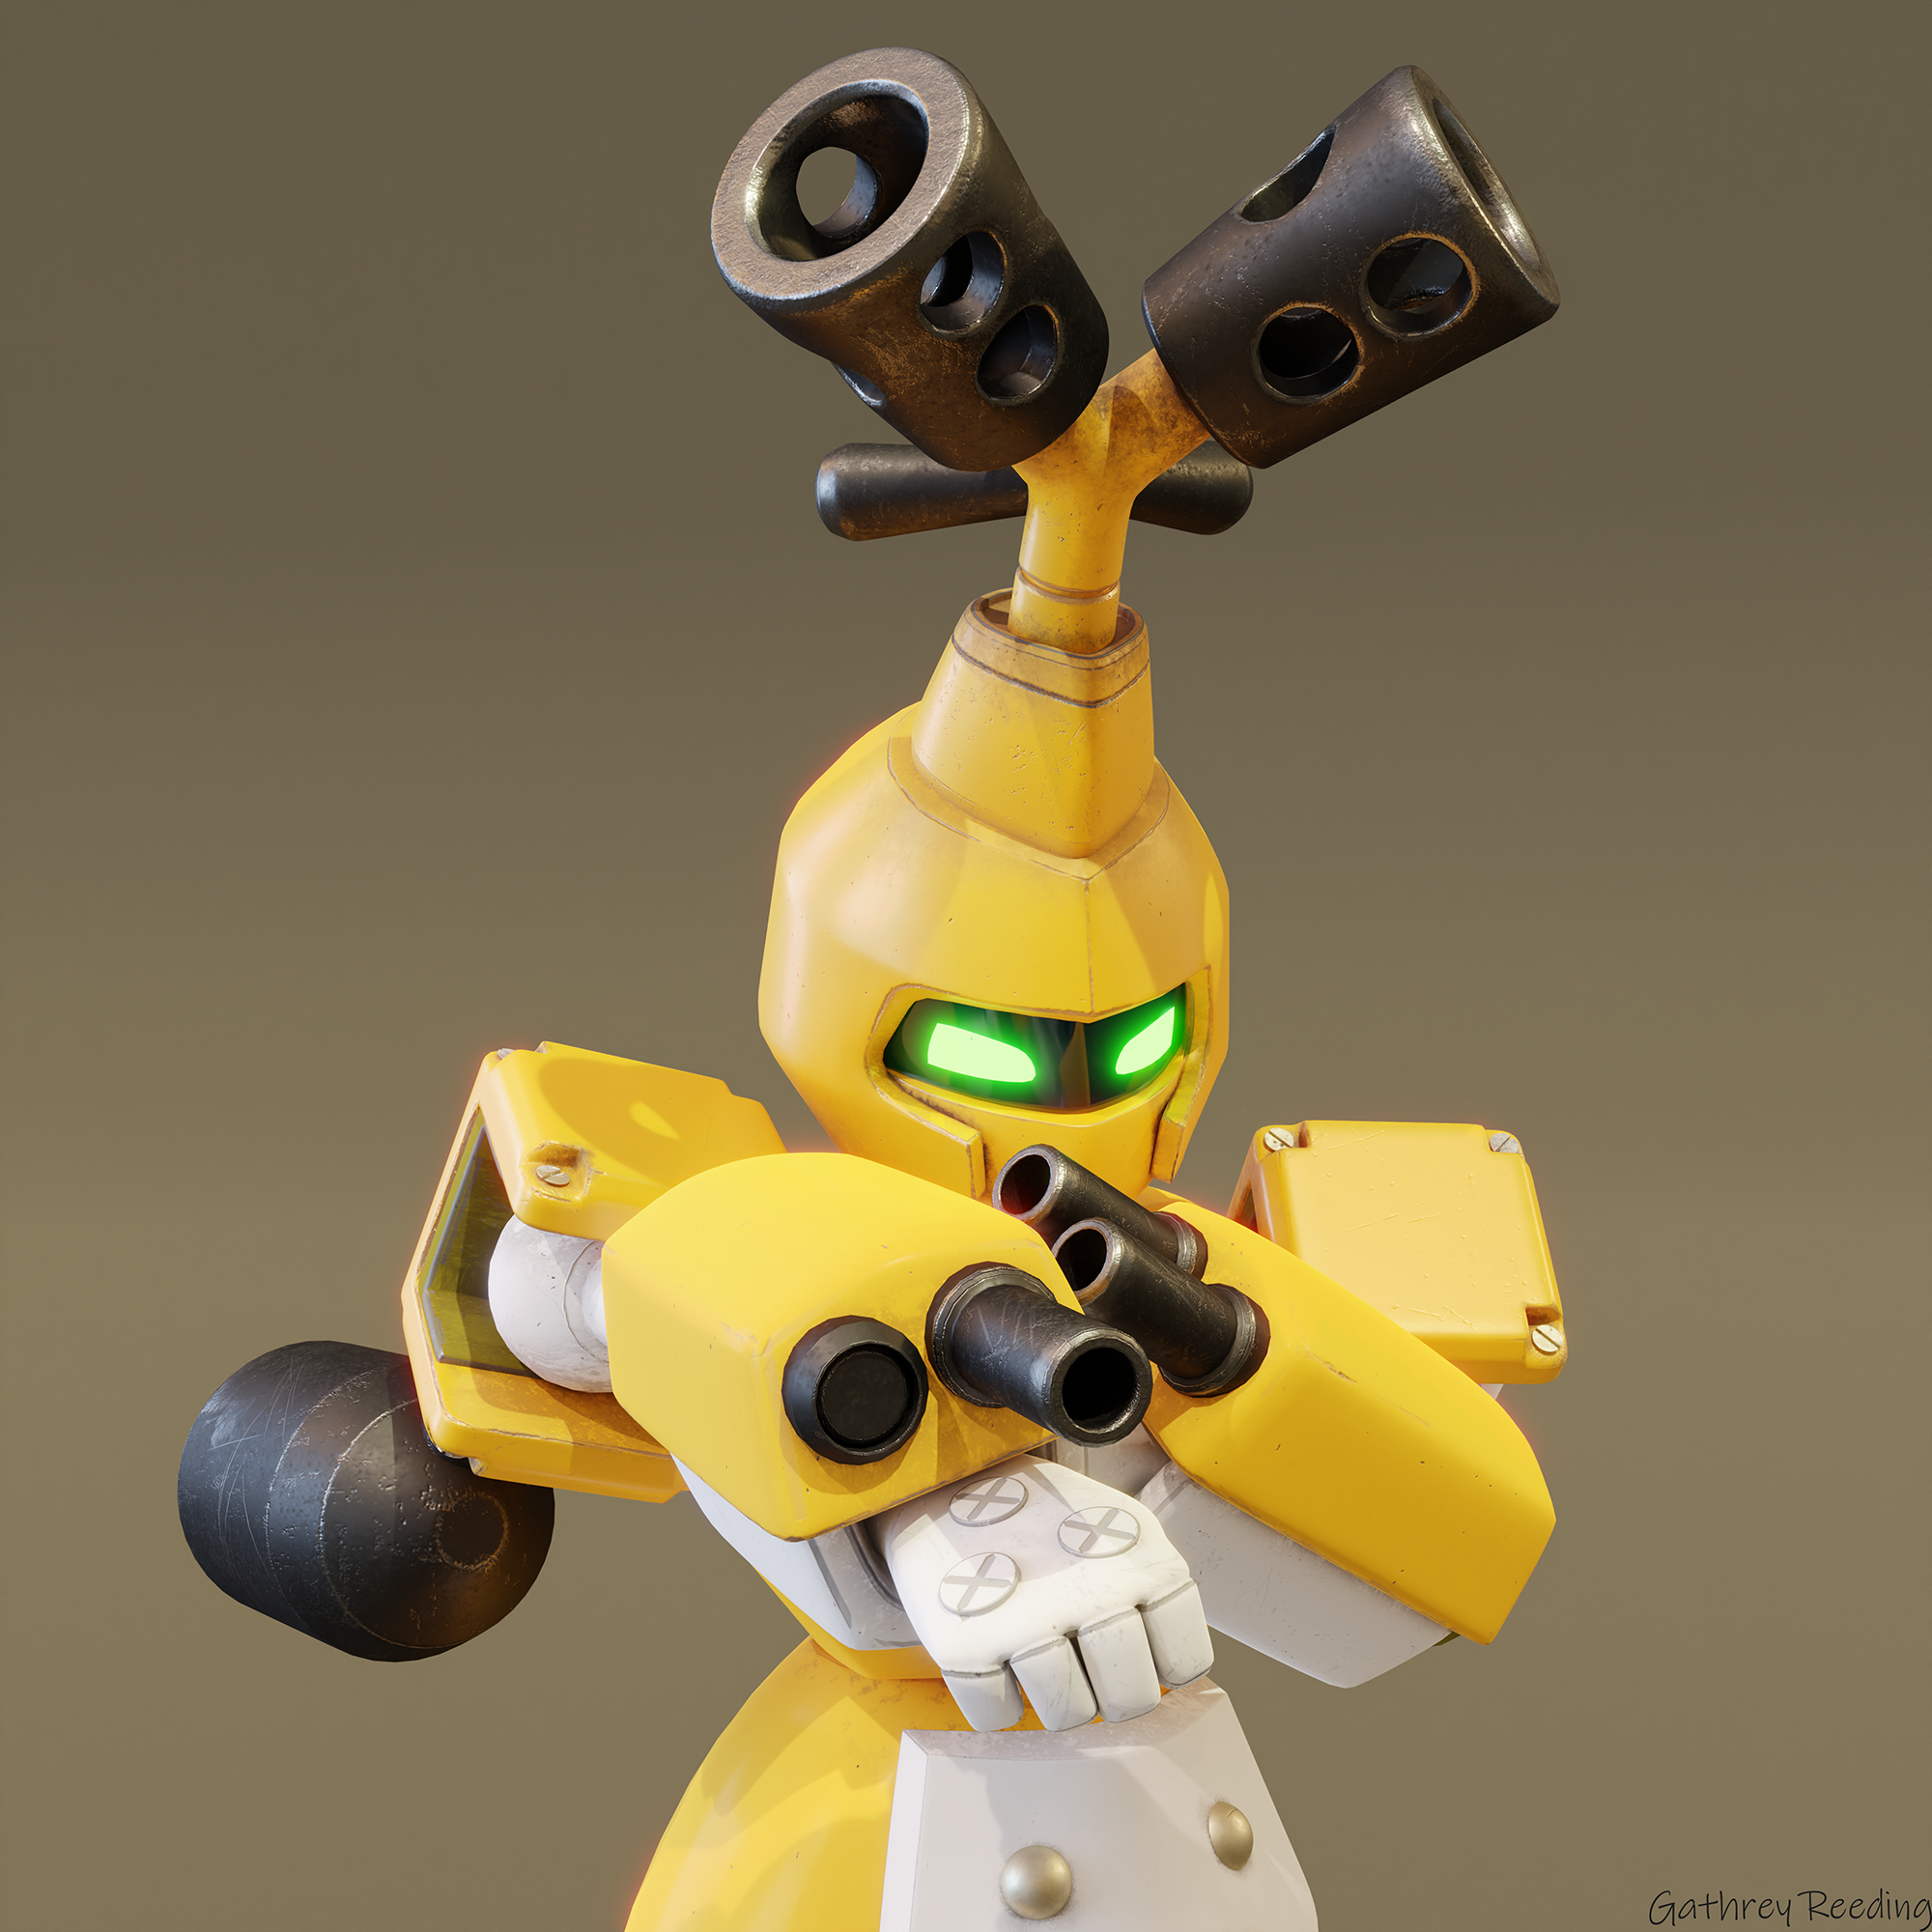 1062-metabee2005x-16642774881057.png